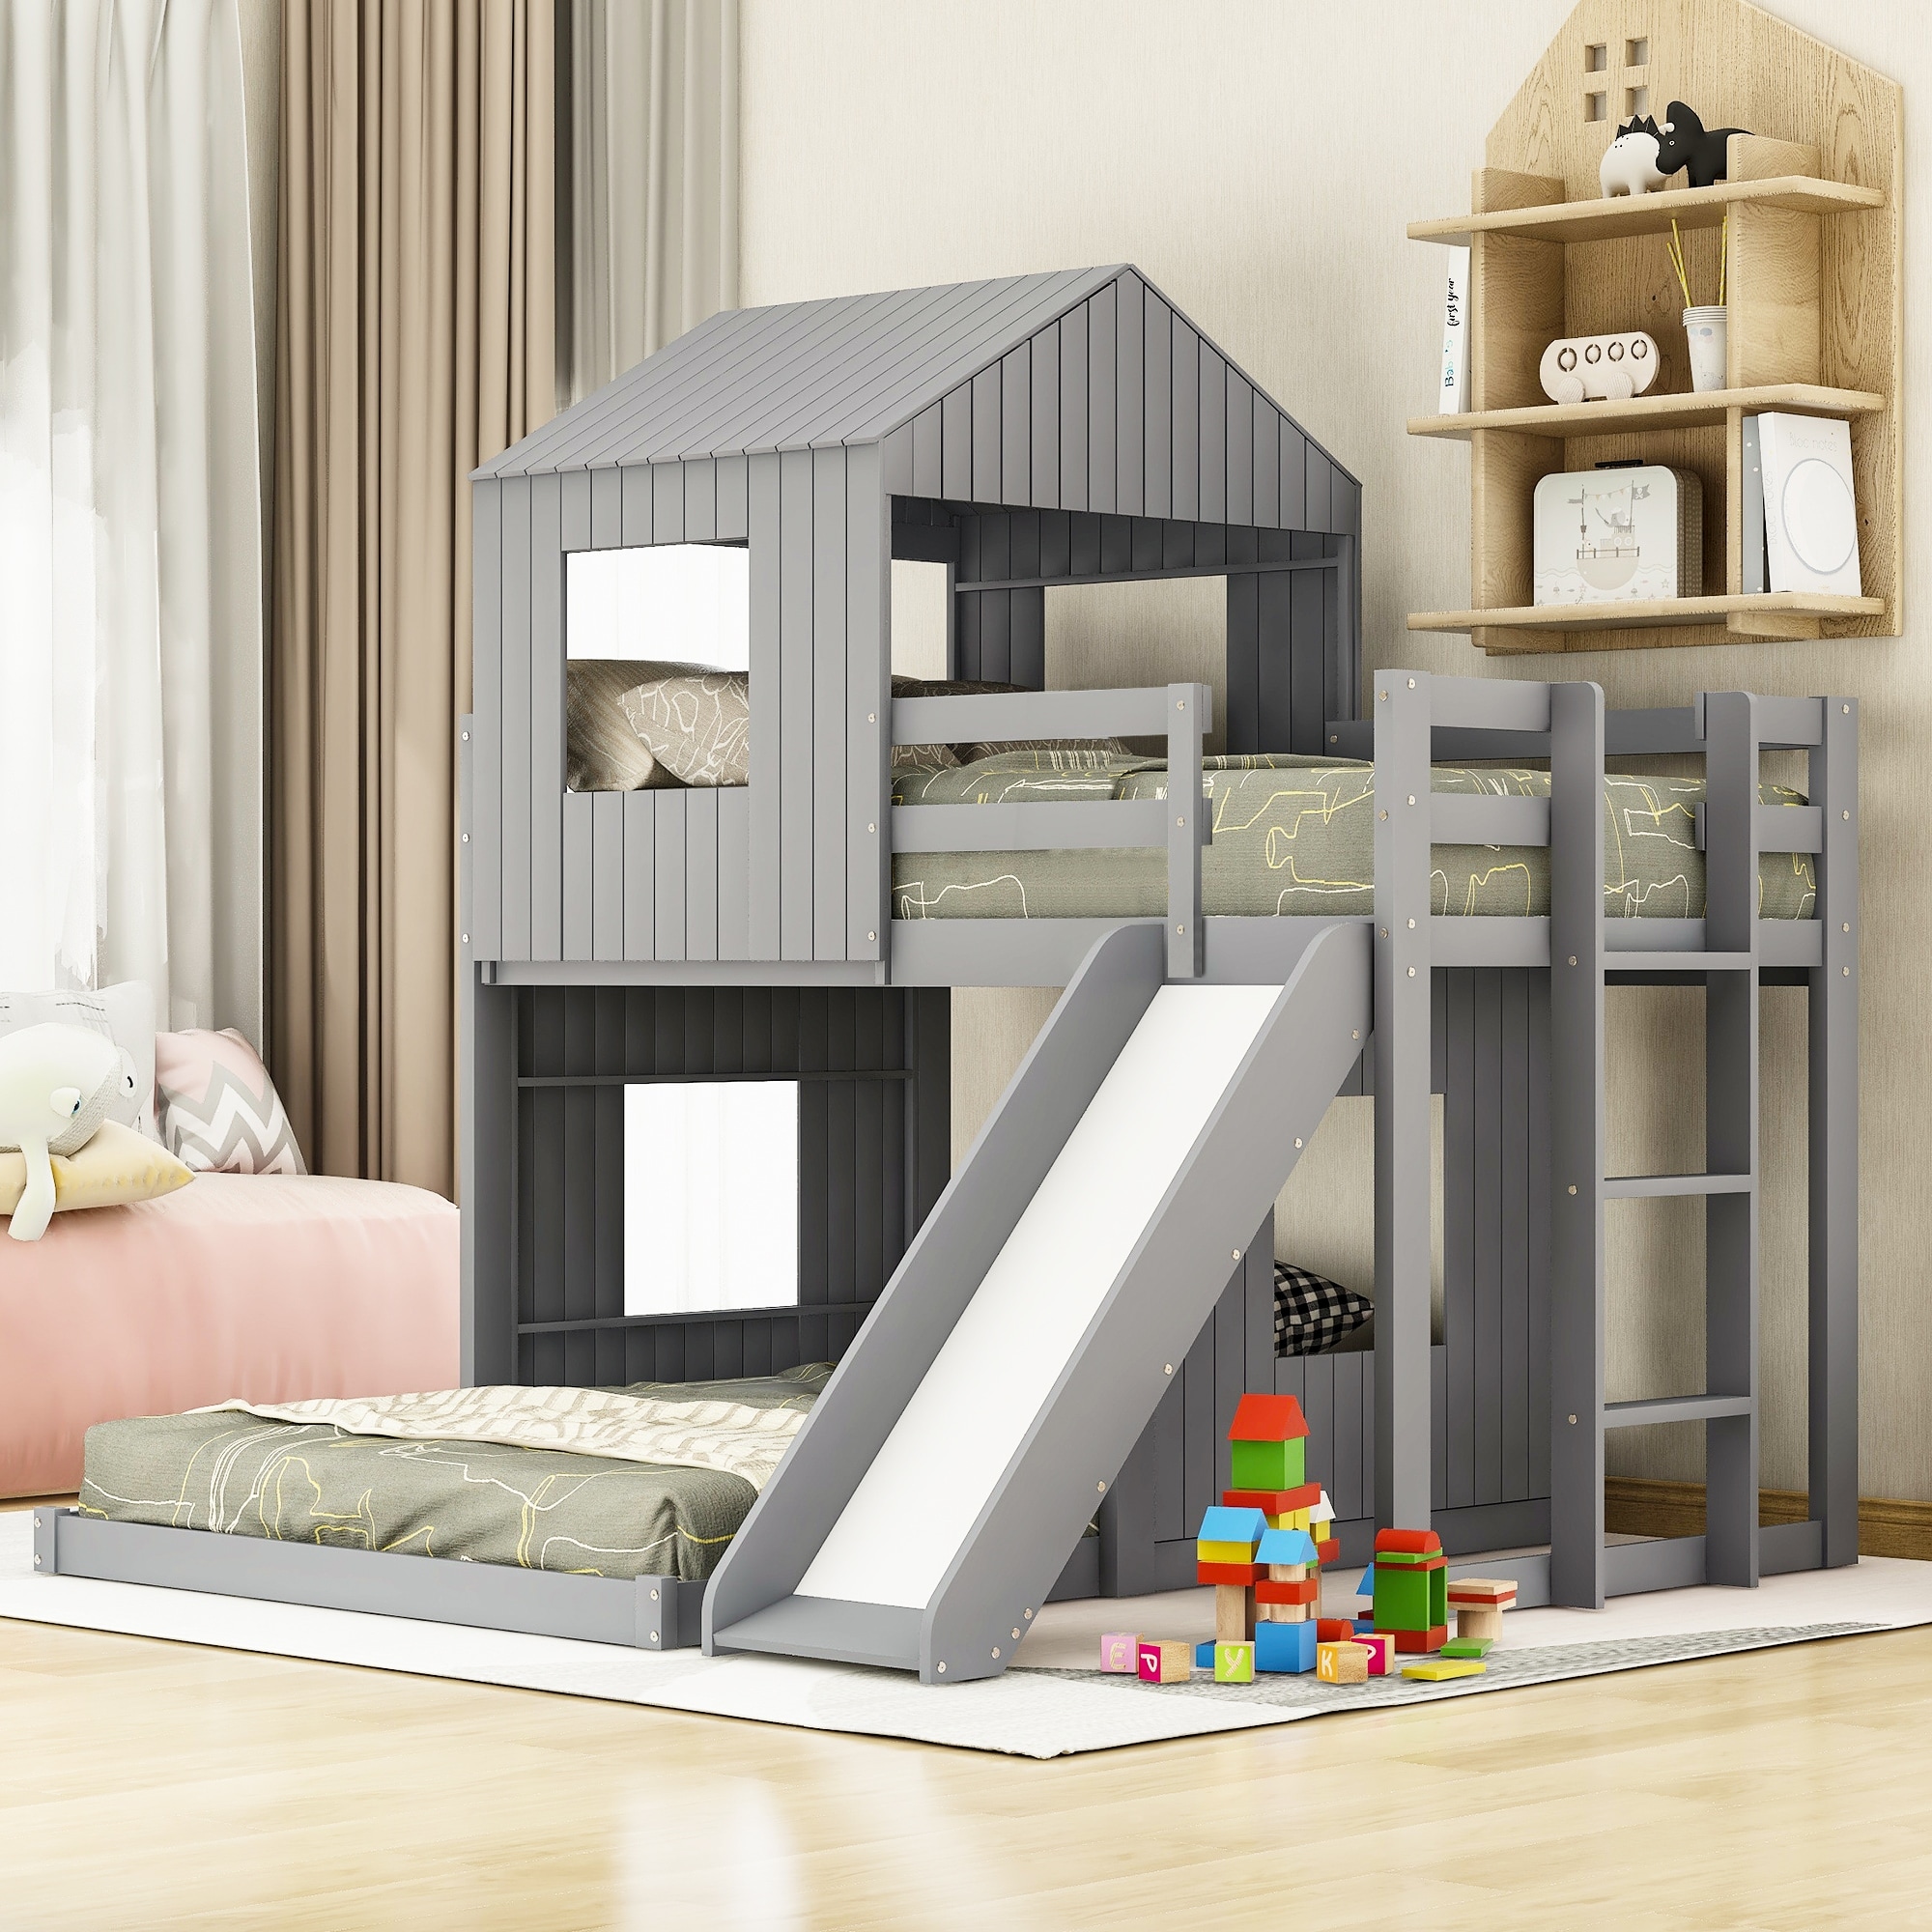 Wooden Twin Over Full Bunk Bed  Loft Bed With Playhouse  Farmhouse  Ladder  Slide And Guardrails  White